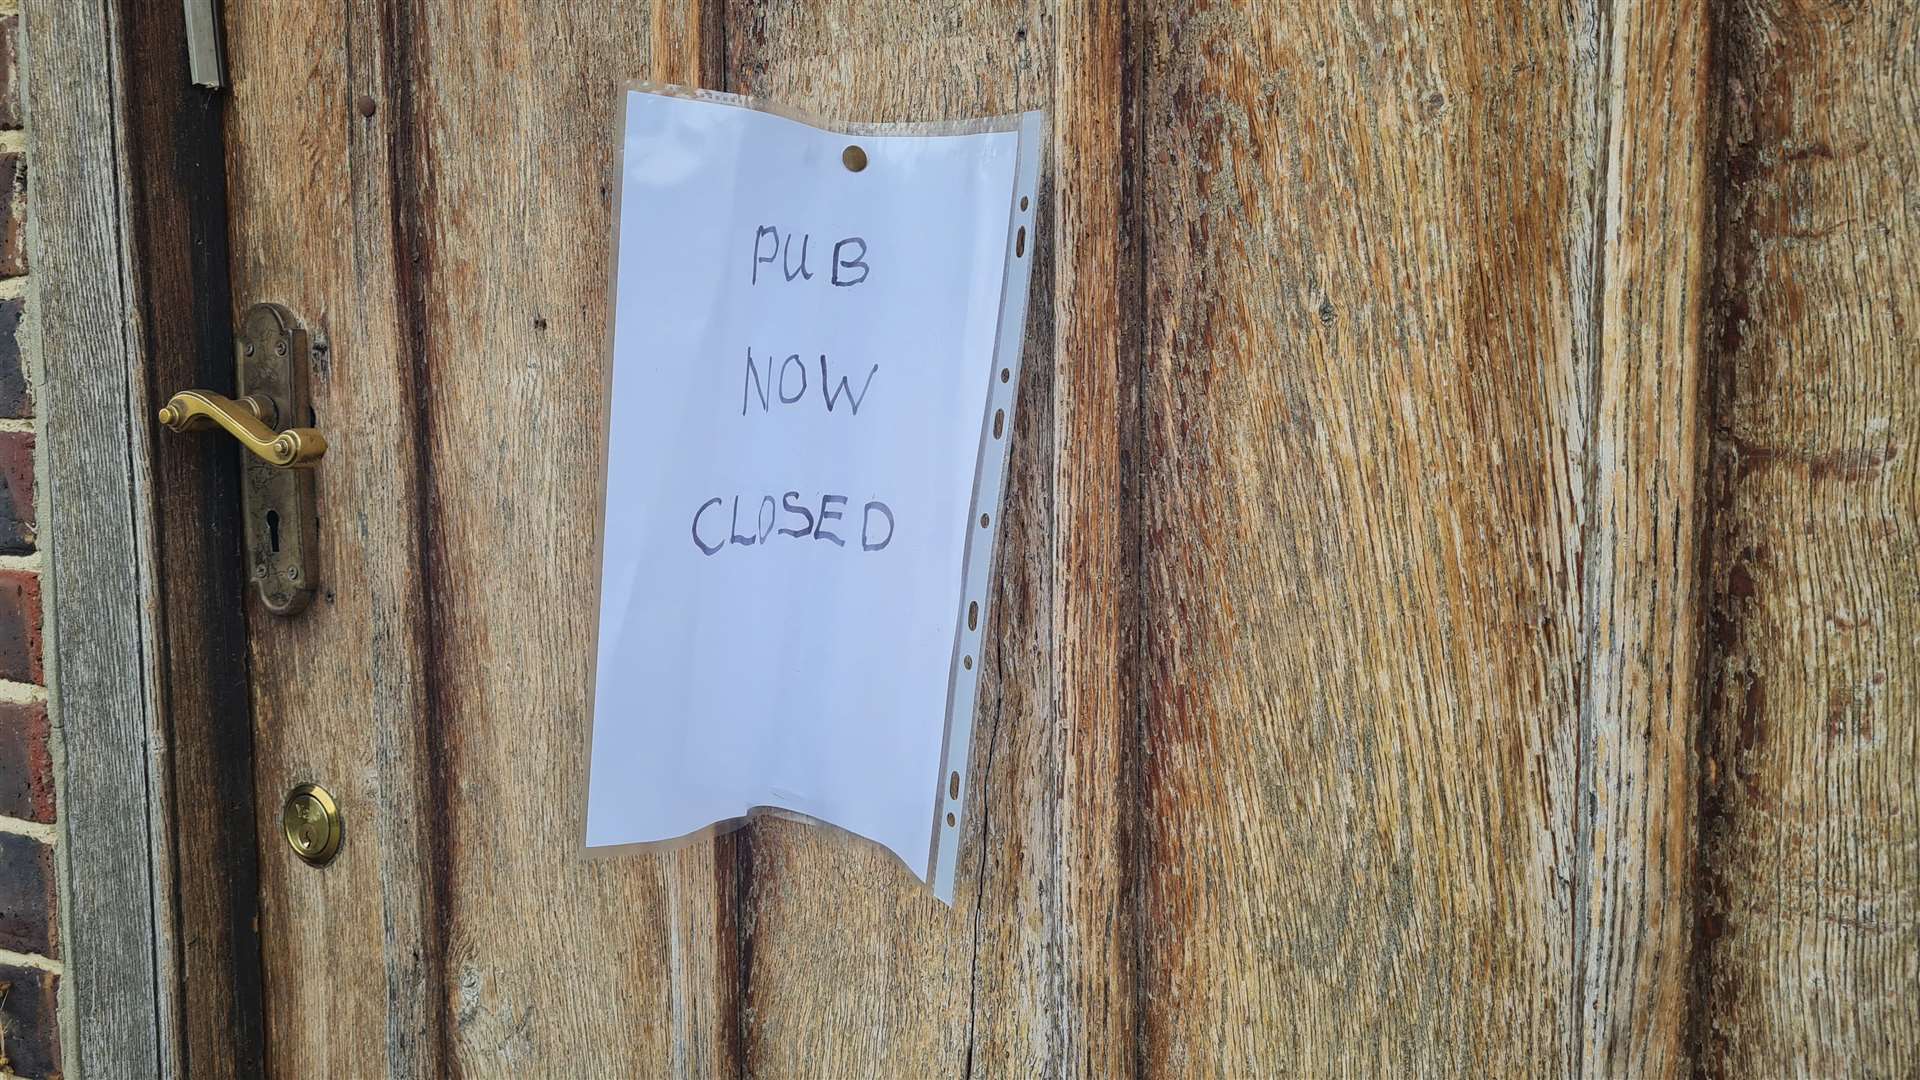 A note on the door simply says 'pub now closed'